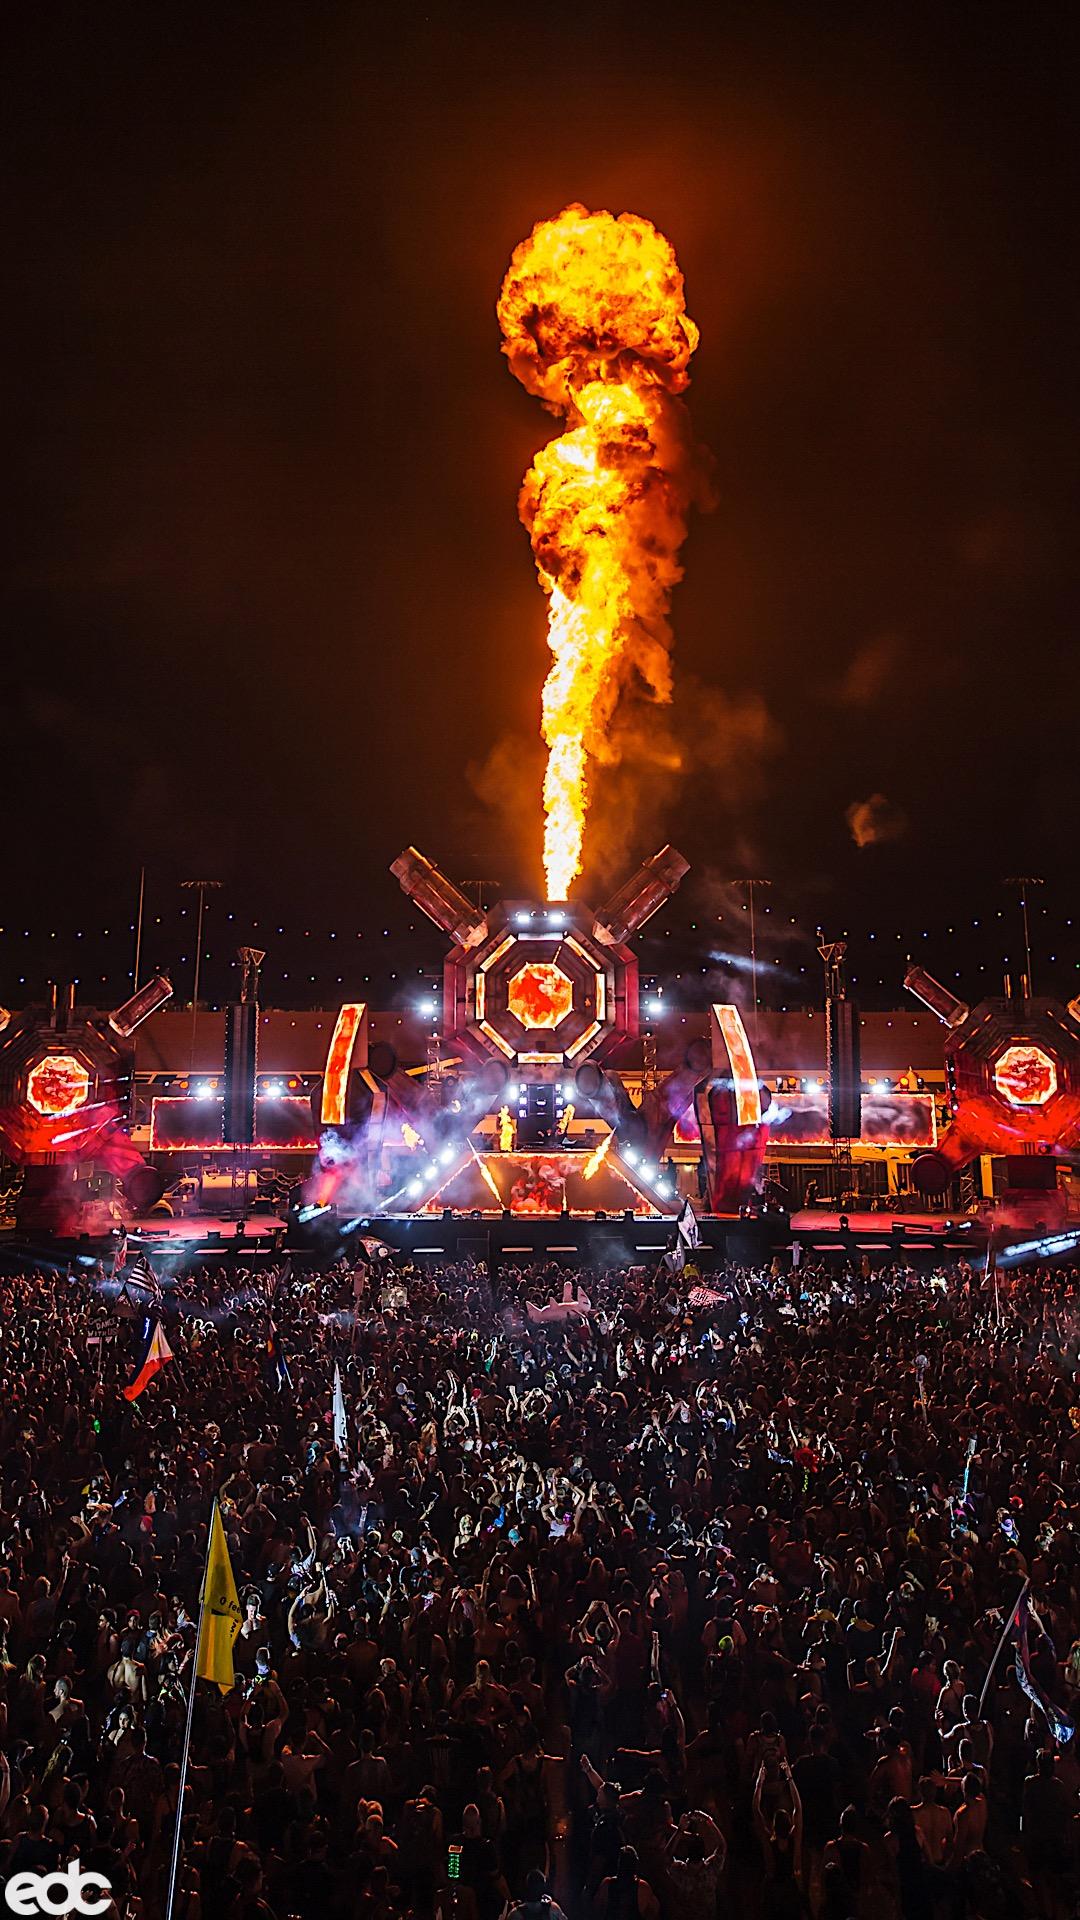 Download These Epic EDC Las Vegas Wallpaper for Your Phone